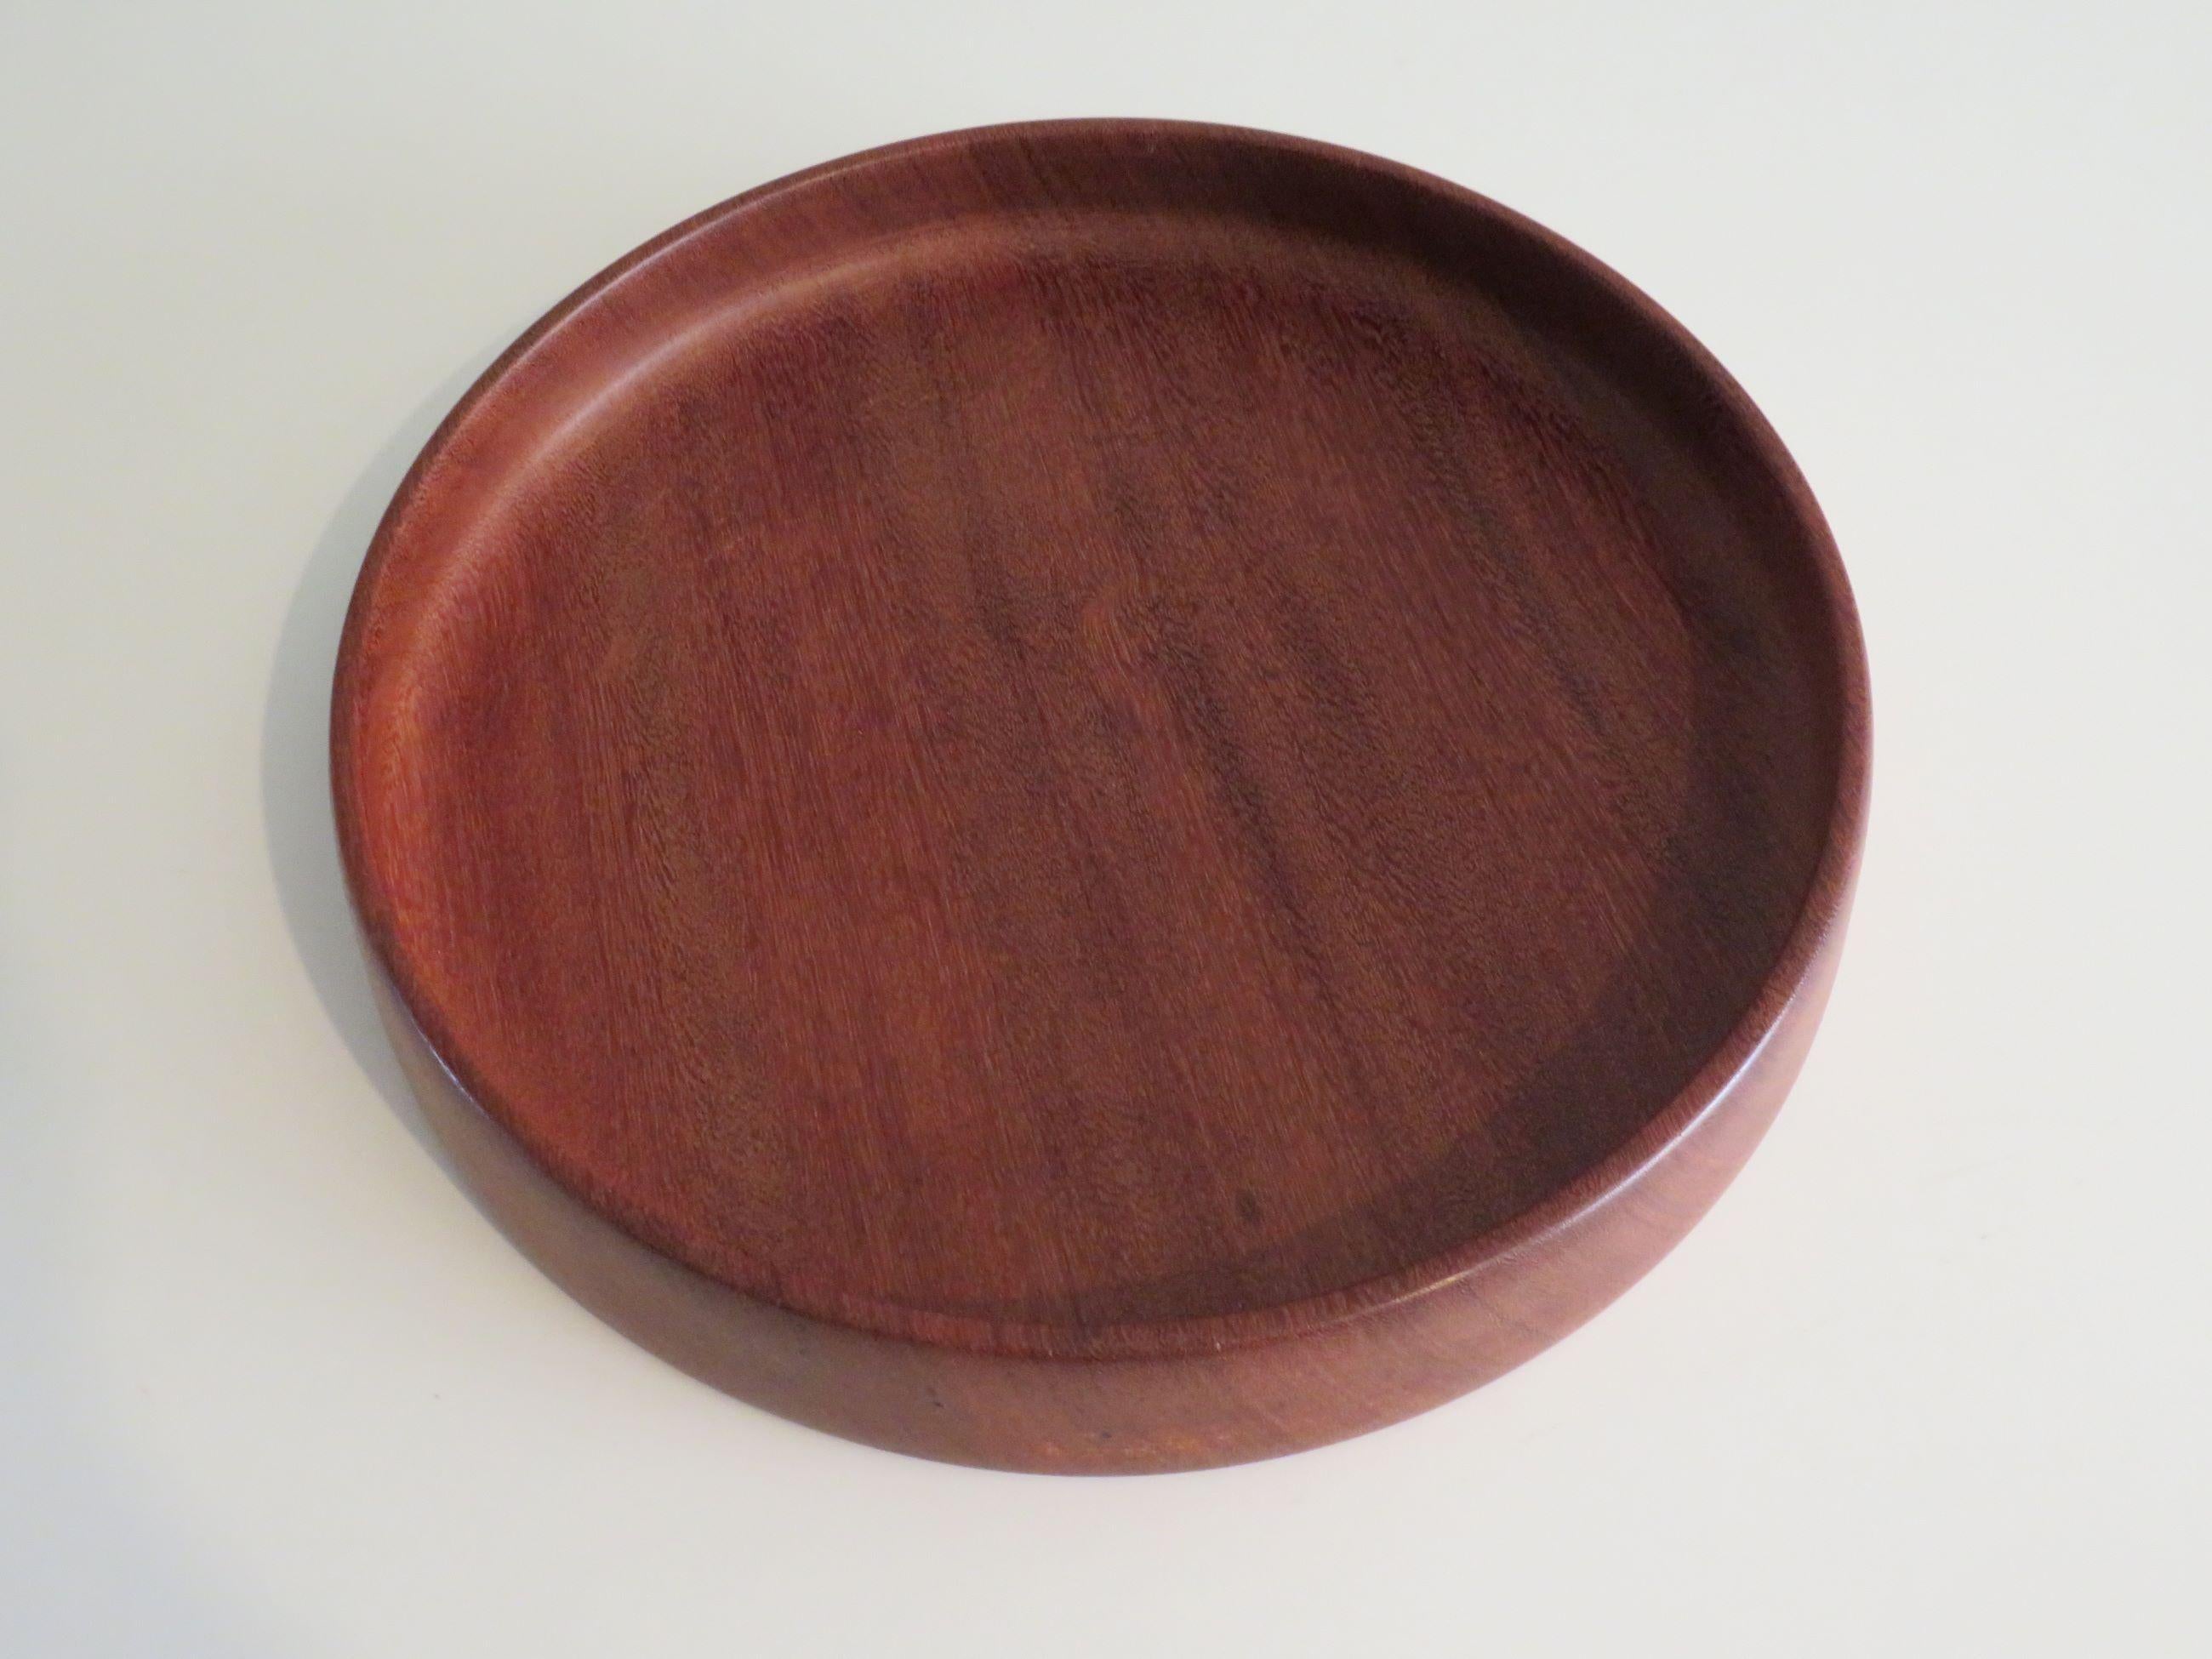 Beautiful round teak serving bowl or fruit bowl with an inward sloping edge.
The diameter of the bowl is 32 cm at the bottom and 31.5 cm at the top, the height is 5 cm.
The item is in very good condition.
Don't hesitate to ask me for a good shipping